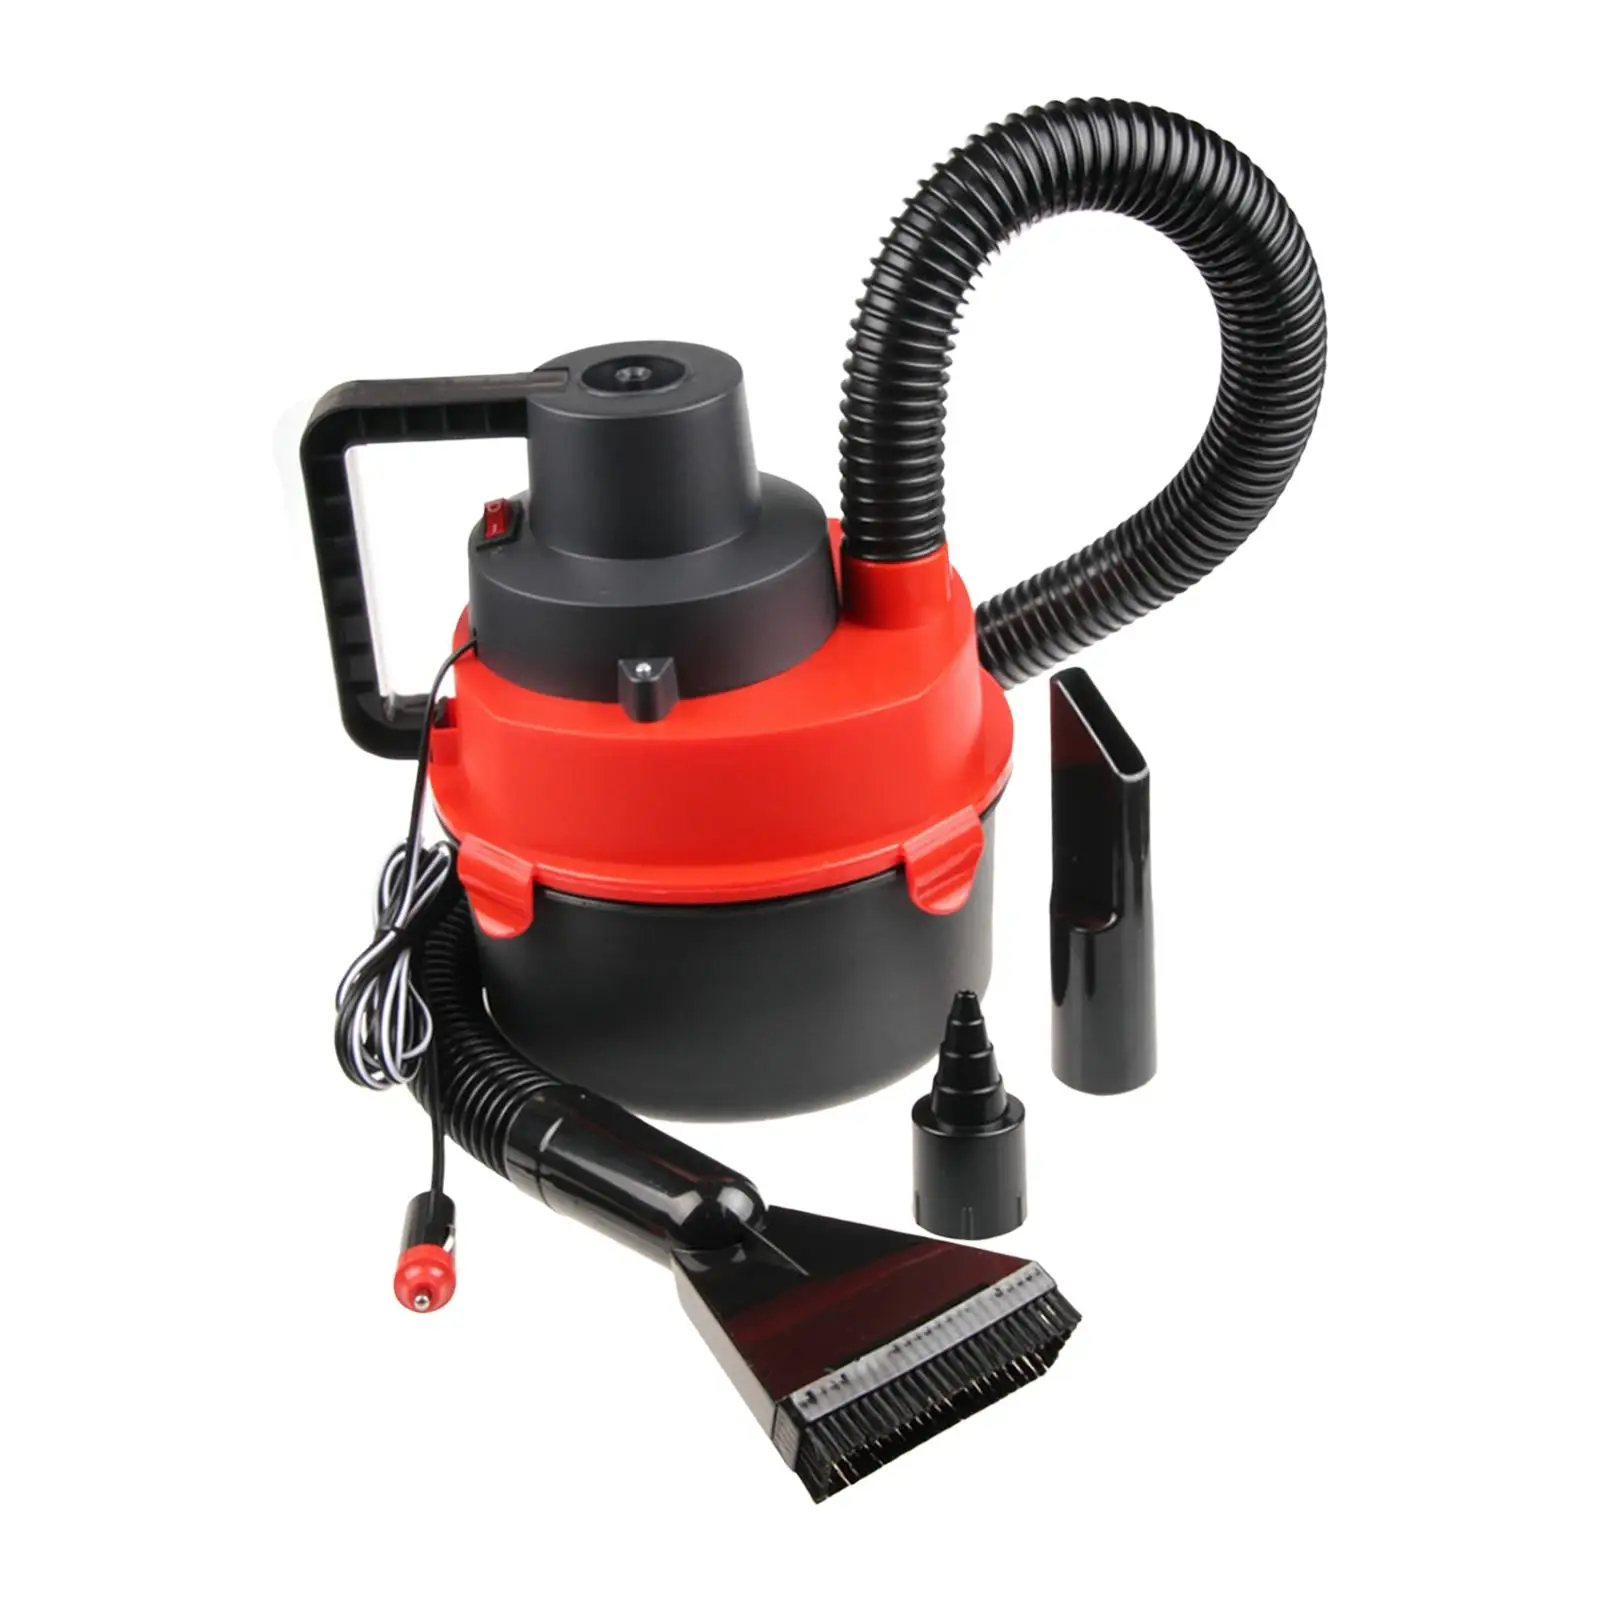 12 Volt Wet Dry Car Auto Canister Vacuum 4L Capacity Professional Flexible Hose for Truck Van Red and Black Portable Low Powered